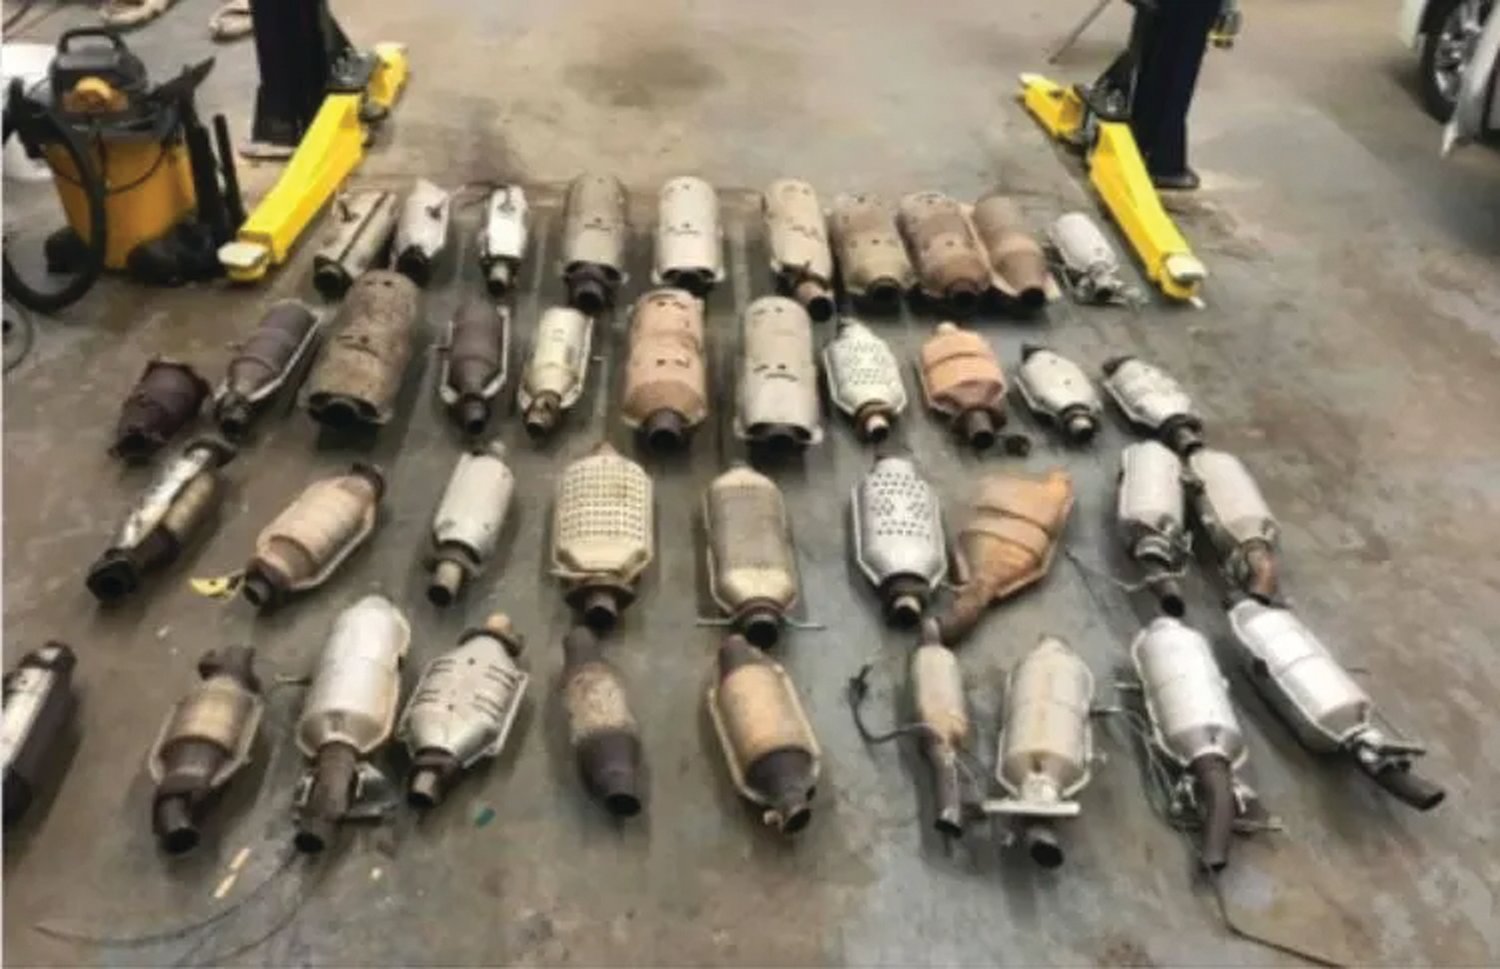 STOLEN PARTS: Catalytic converters seized by police are lined up after an arrest.